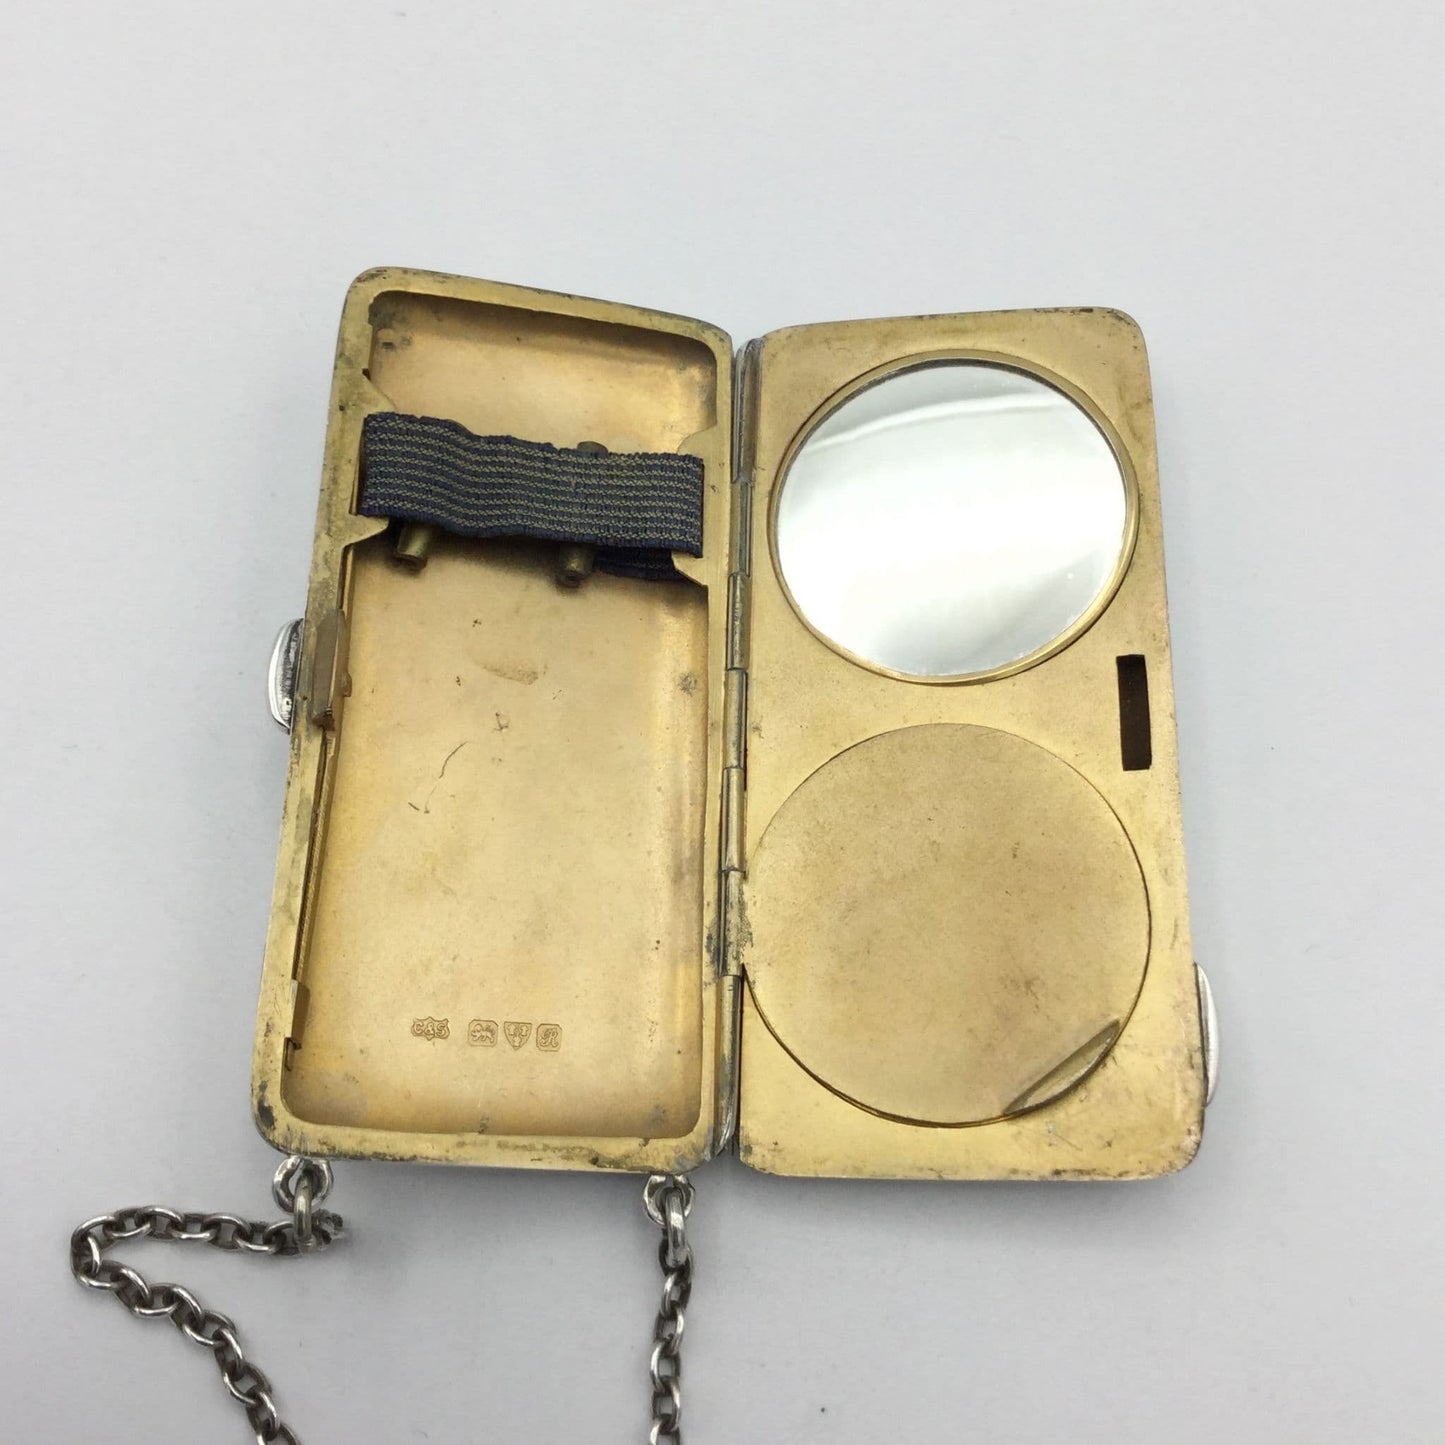 gilded golden inside of case showing a mirror, powder area and chain